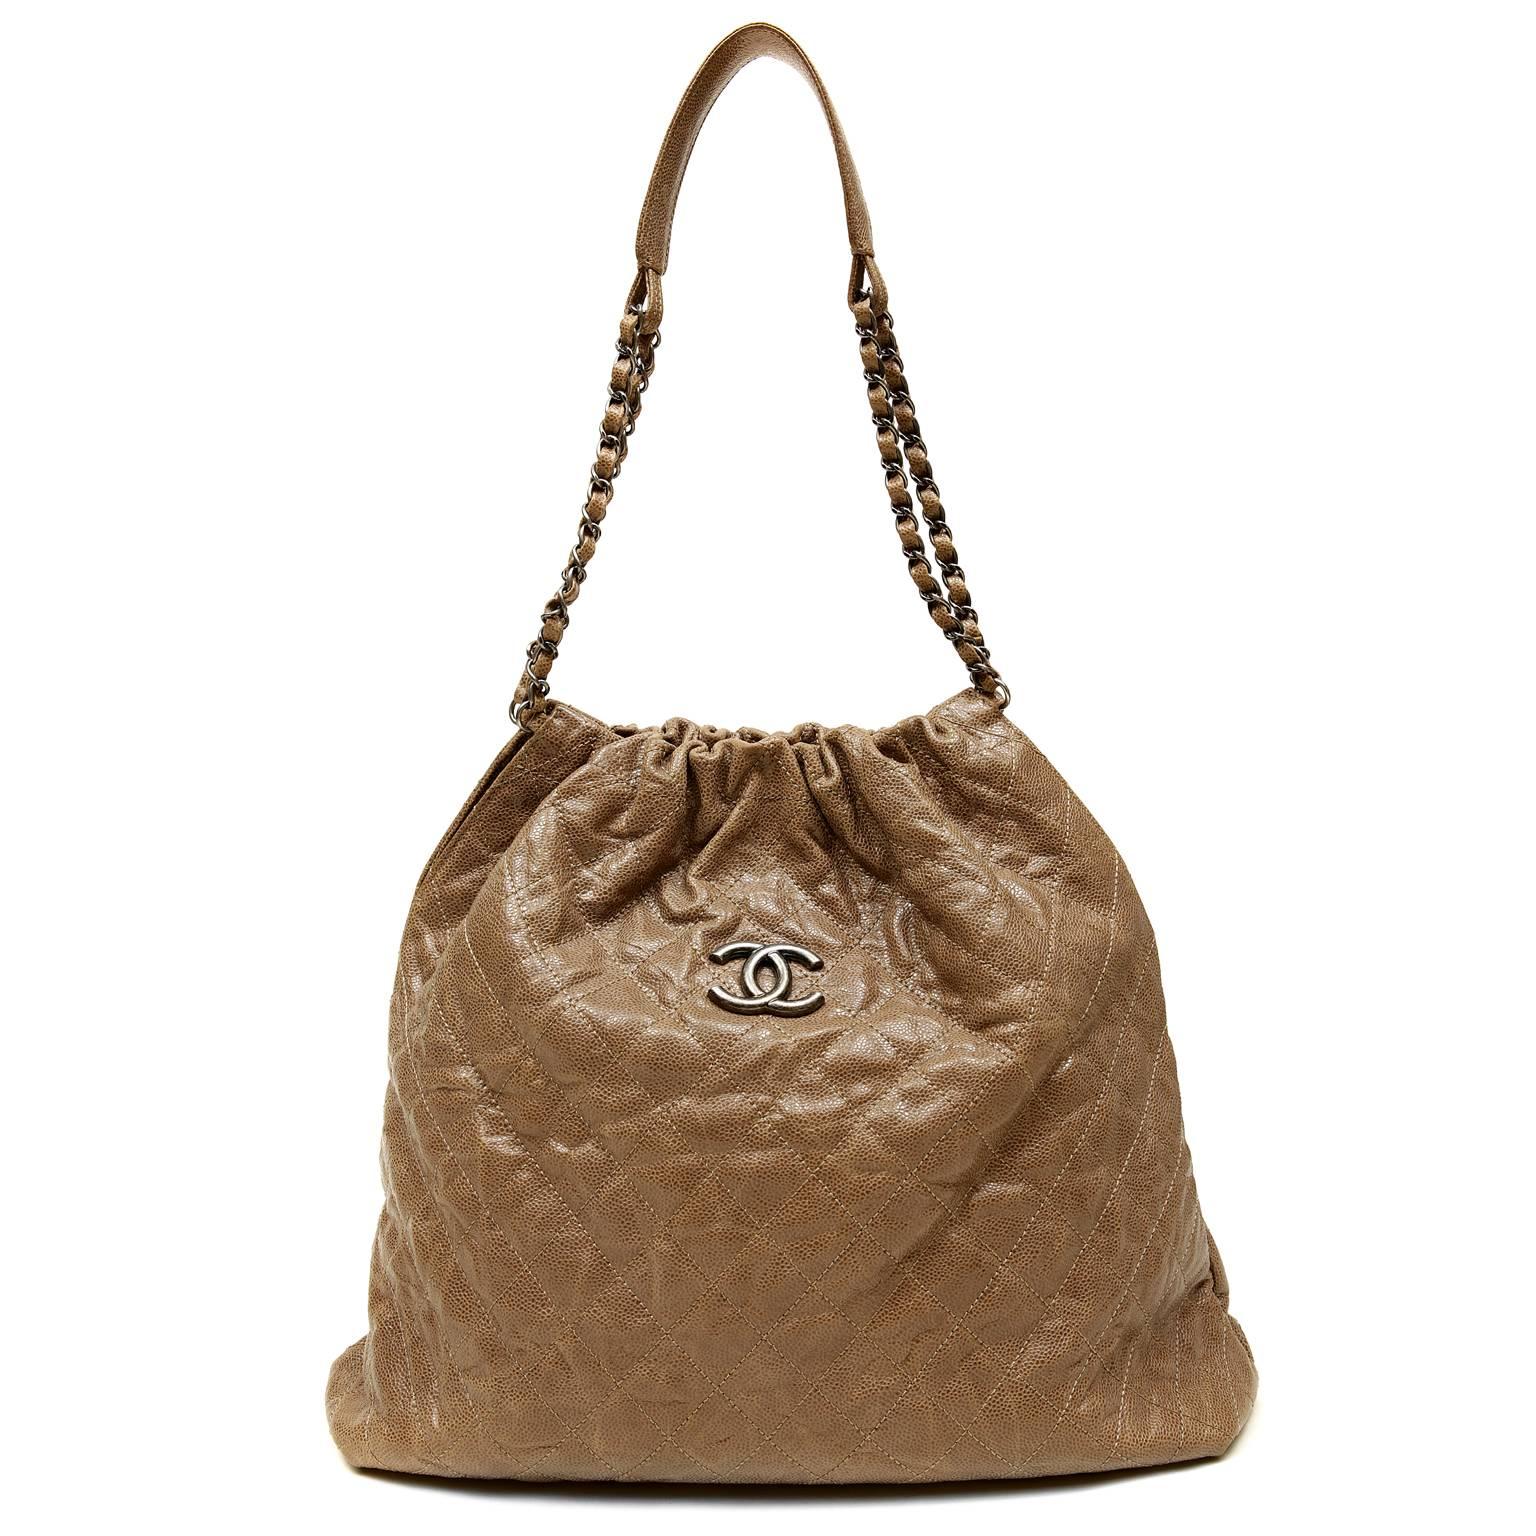 Chanel Light Brown Taupe Caviar Leather Large Hobo Shopper 5